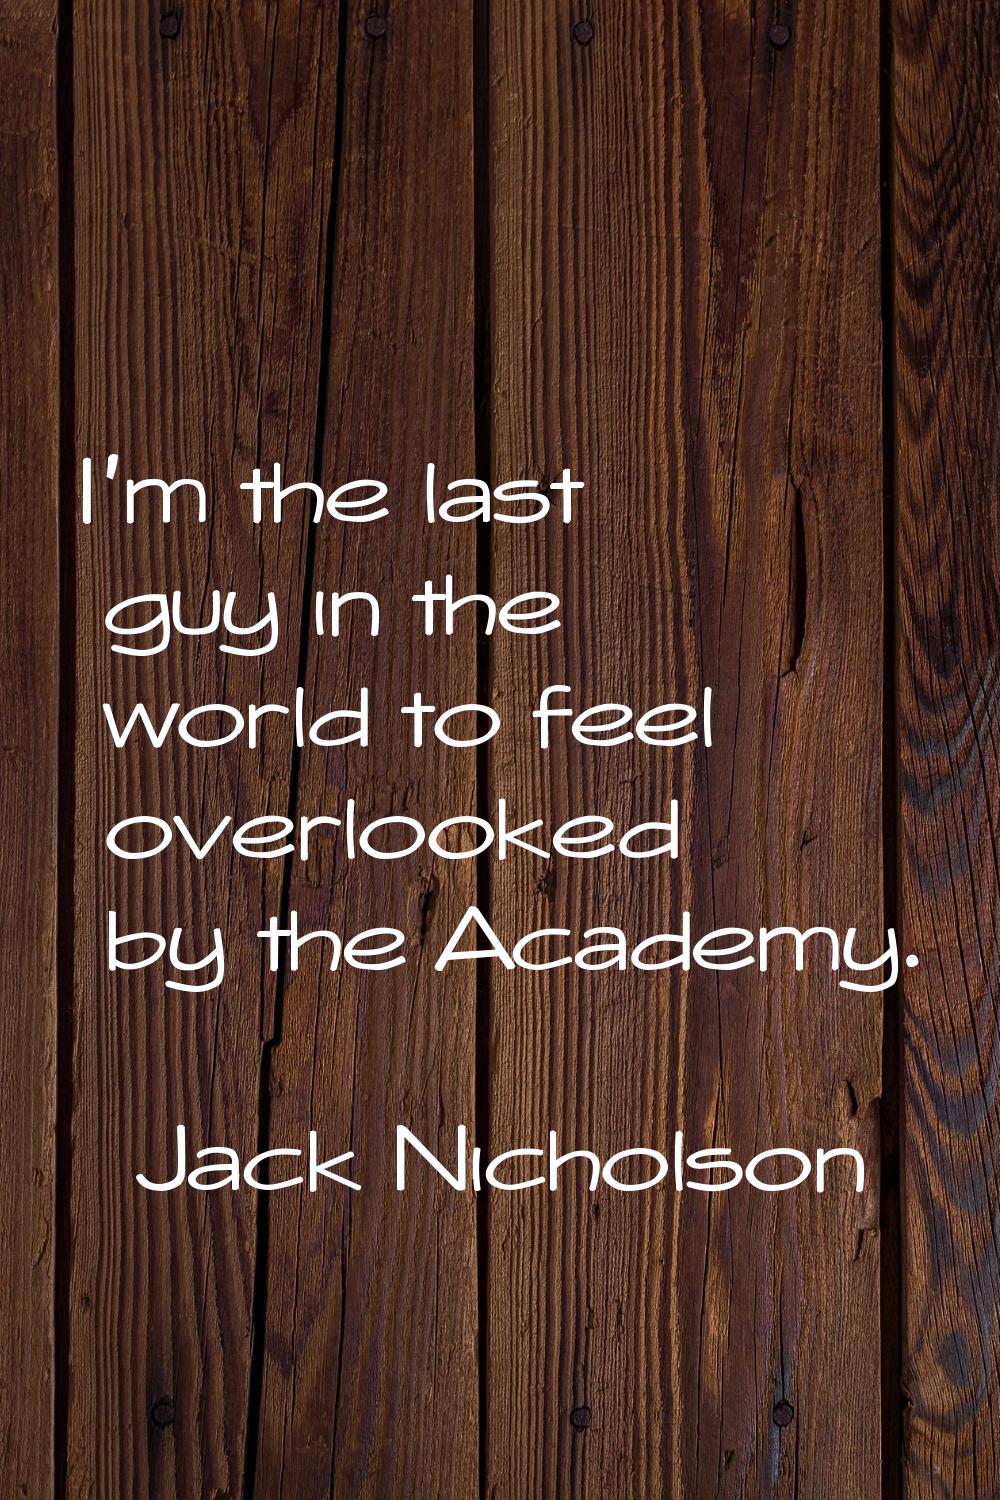 I'm the last guy in the world to feel overlooked by the Academy.